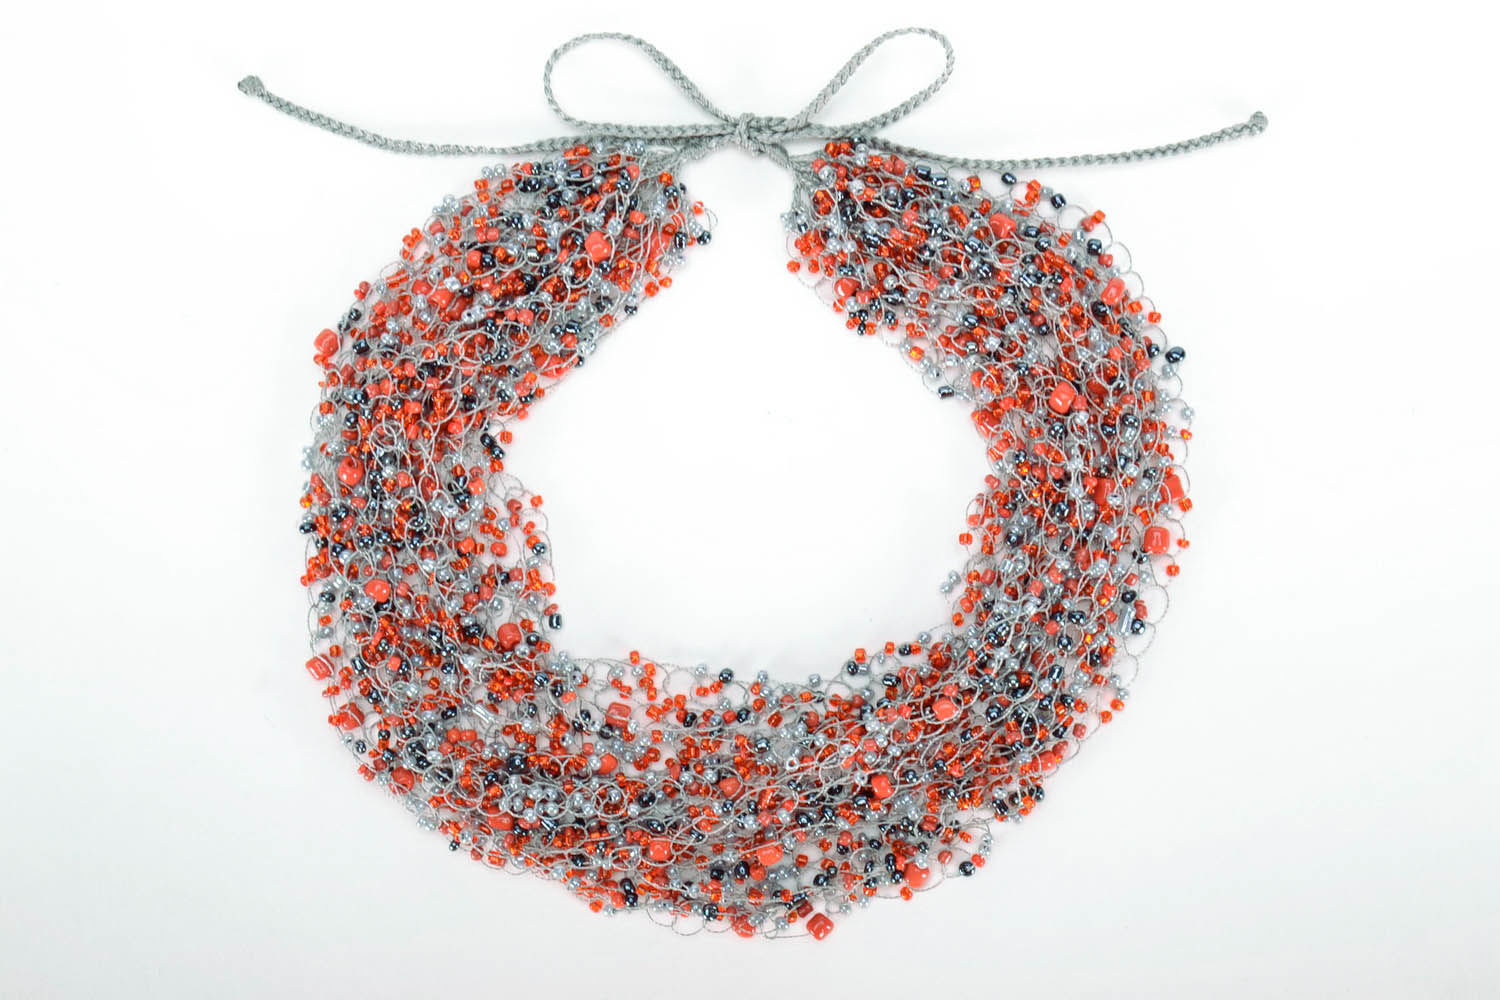 Colorful necklace made of beads photo 1